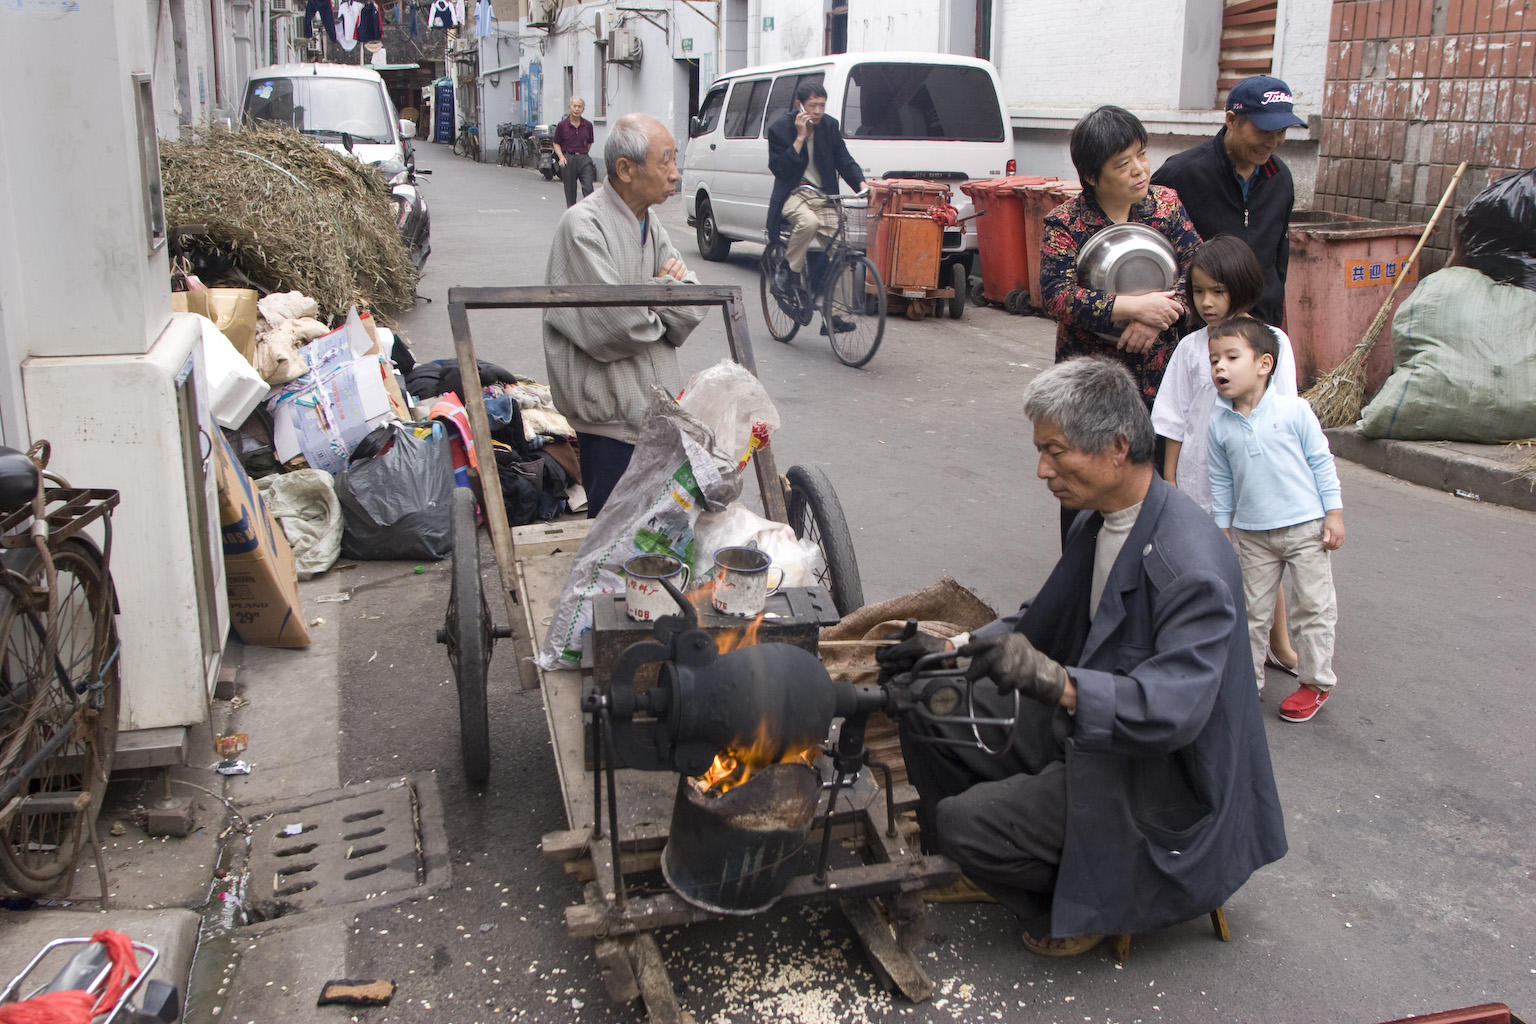 Making popcorn, Old City, Shanghai, May 2011.  Photograph by Jamie Carstairs.